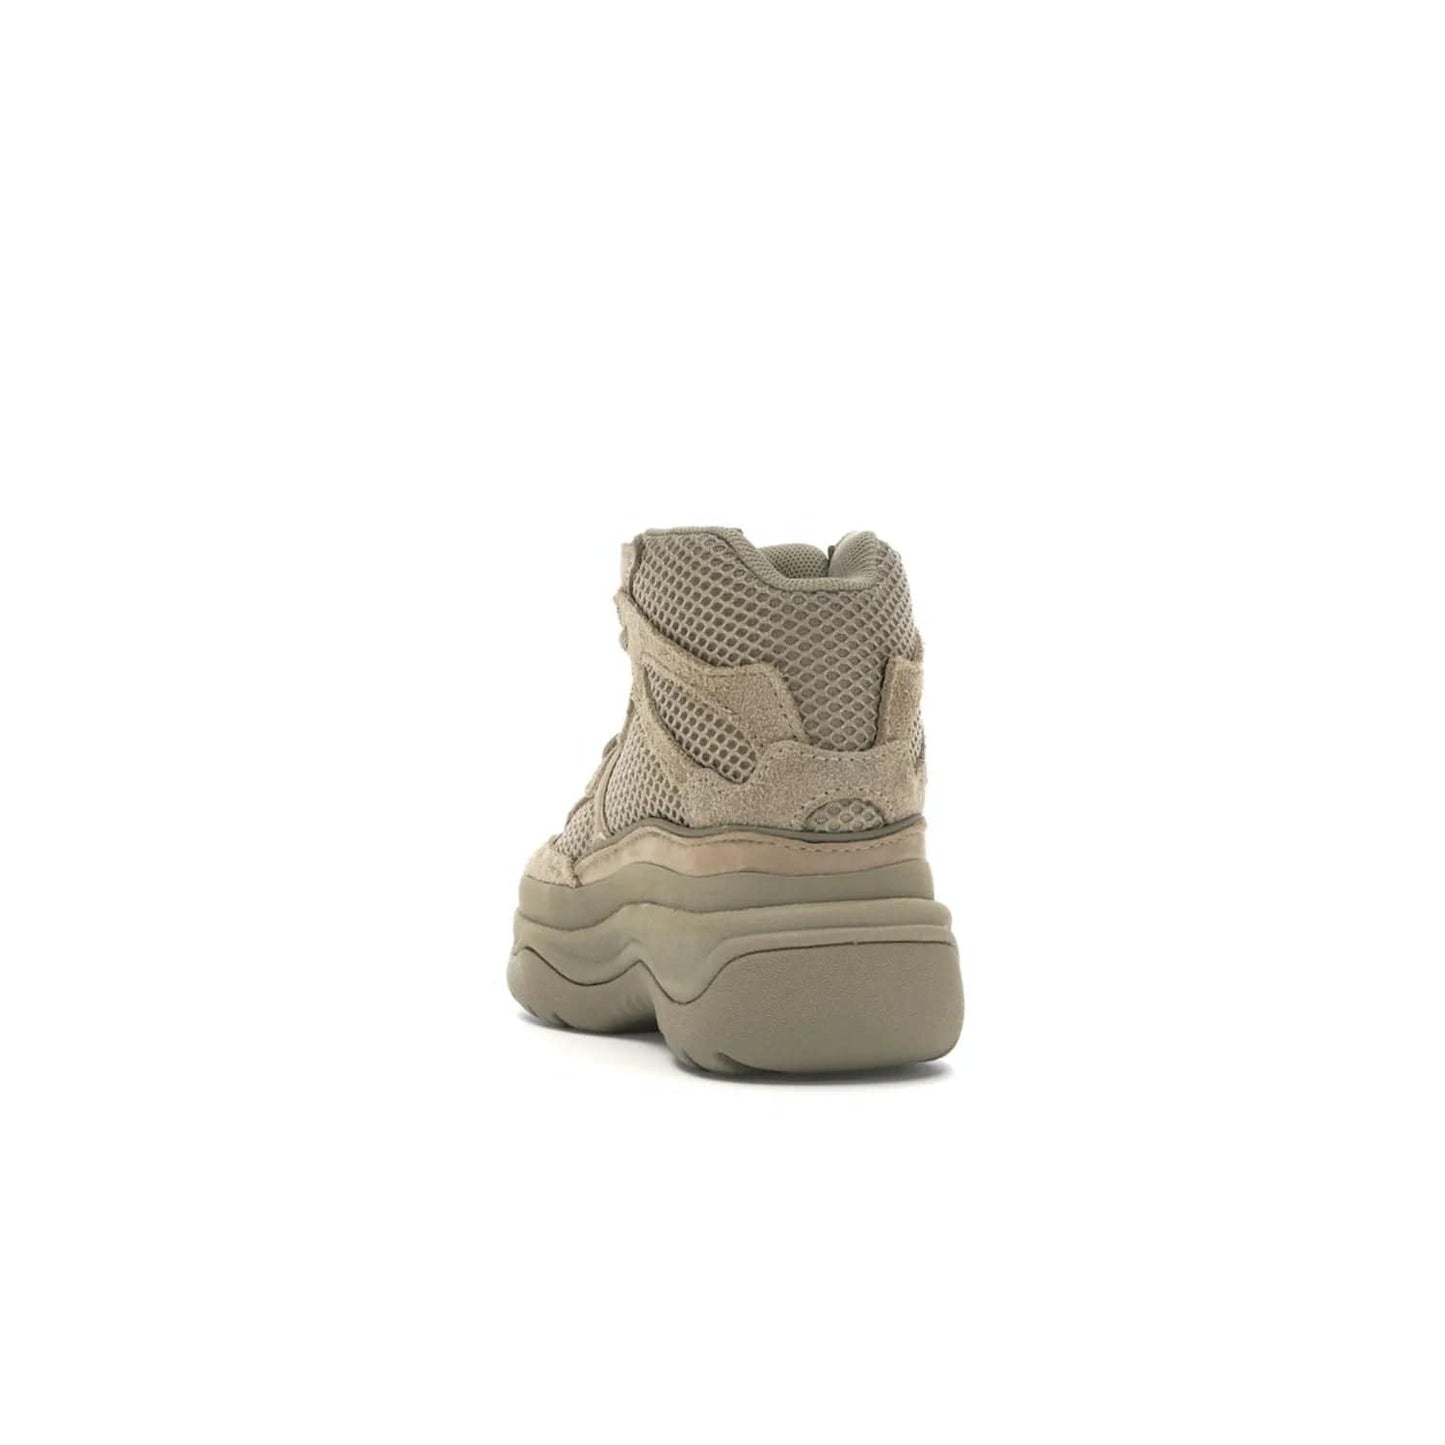 adidas Yeezy Desert Boot Rock (Kids) - Image 26 - Only at www.BallersClubKickz.com - Elevate your style this season with the adidas Yeezy Desert Boot Rock. Crafted from layered nylon and suede, this chic kids' silhouette features an EVA midsole and rubber outsole for superior cushioning and traction.